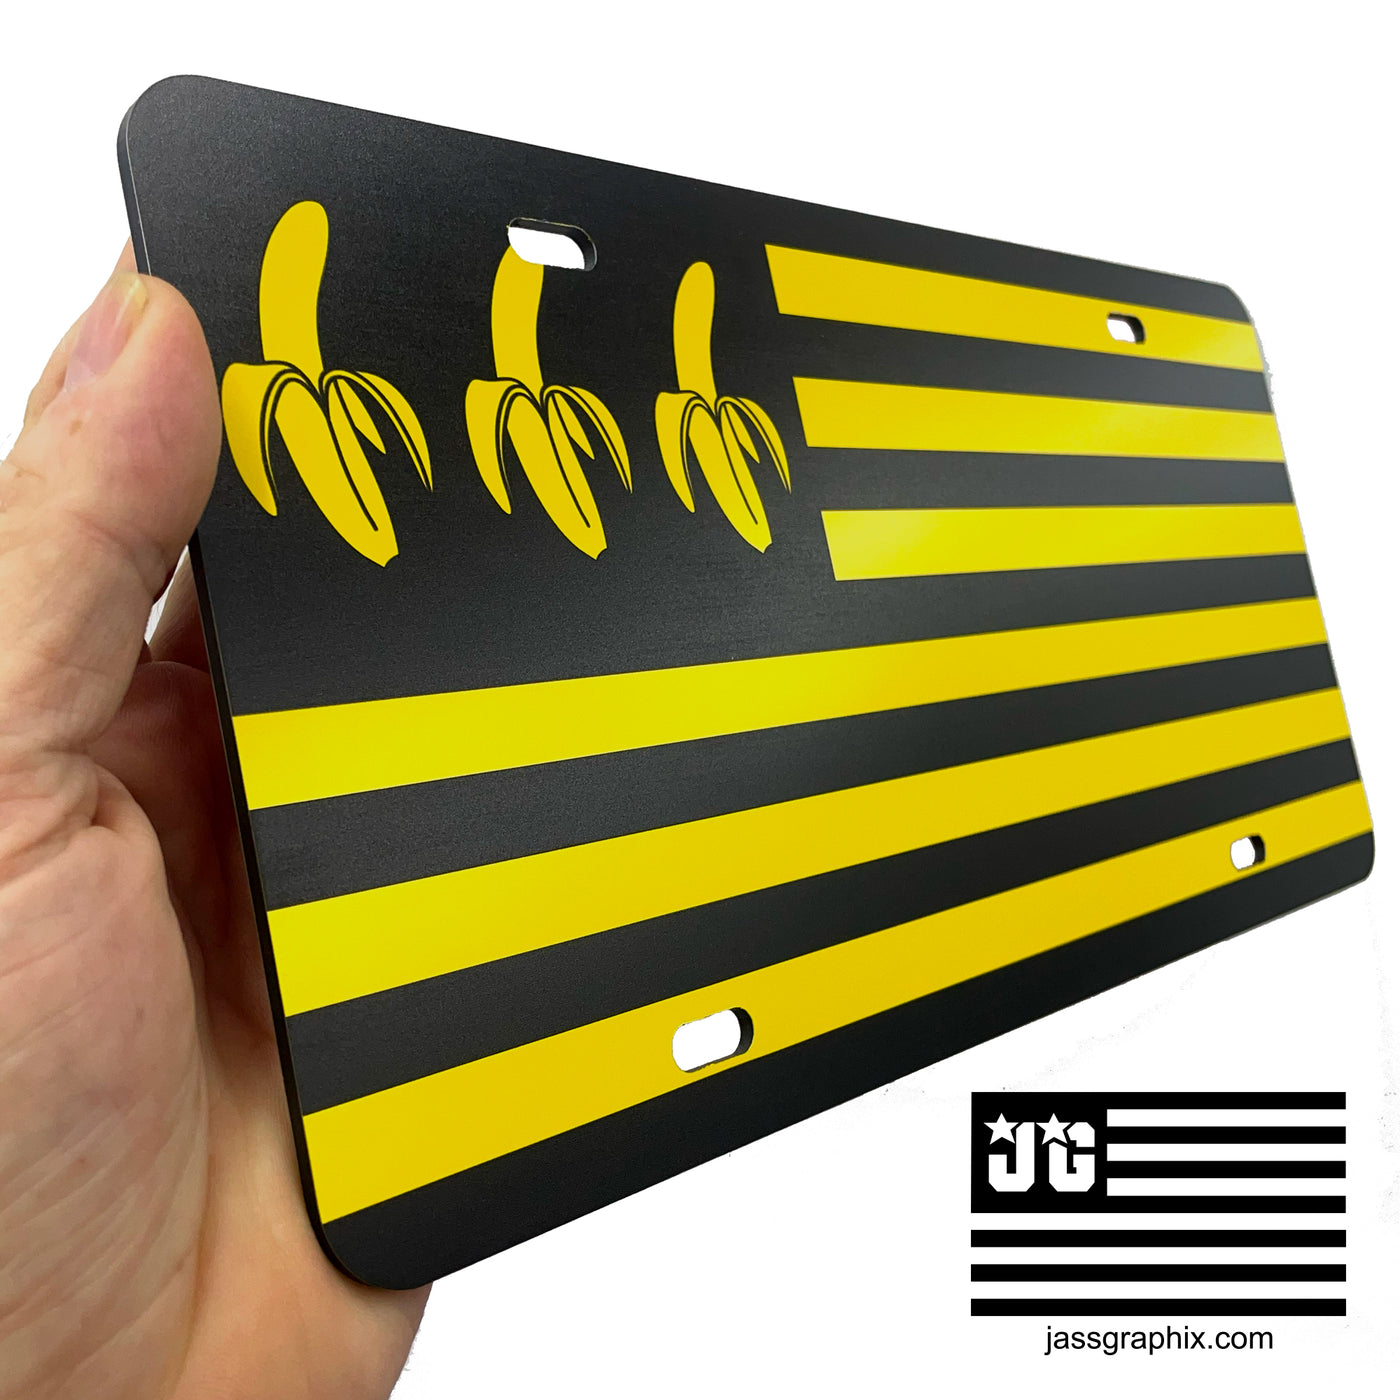 American Flag License Plate With Bananas - Novelty License Plate – Unique Decorative Car Tag for Vehicles